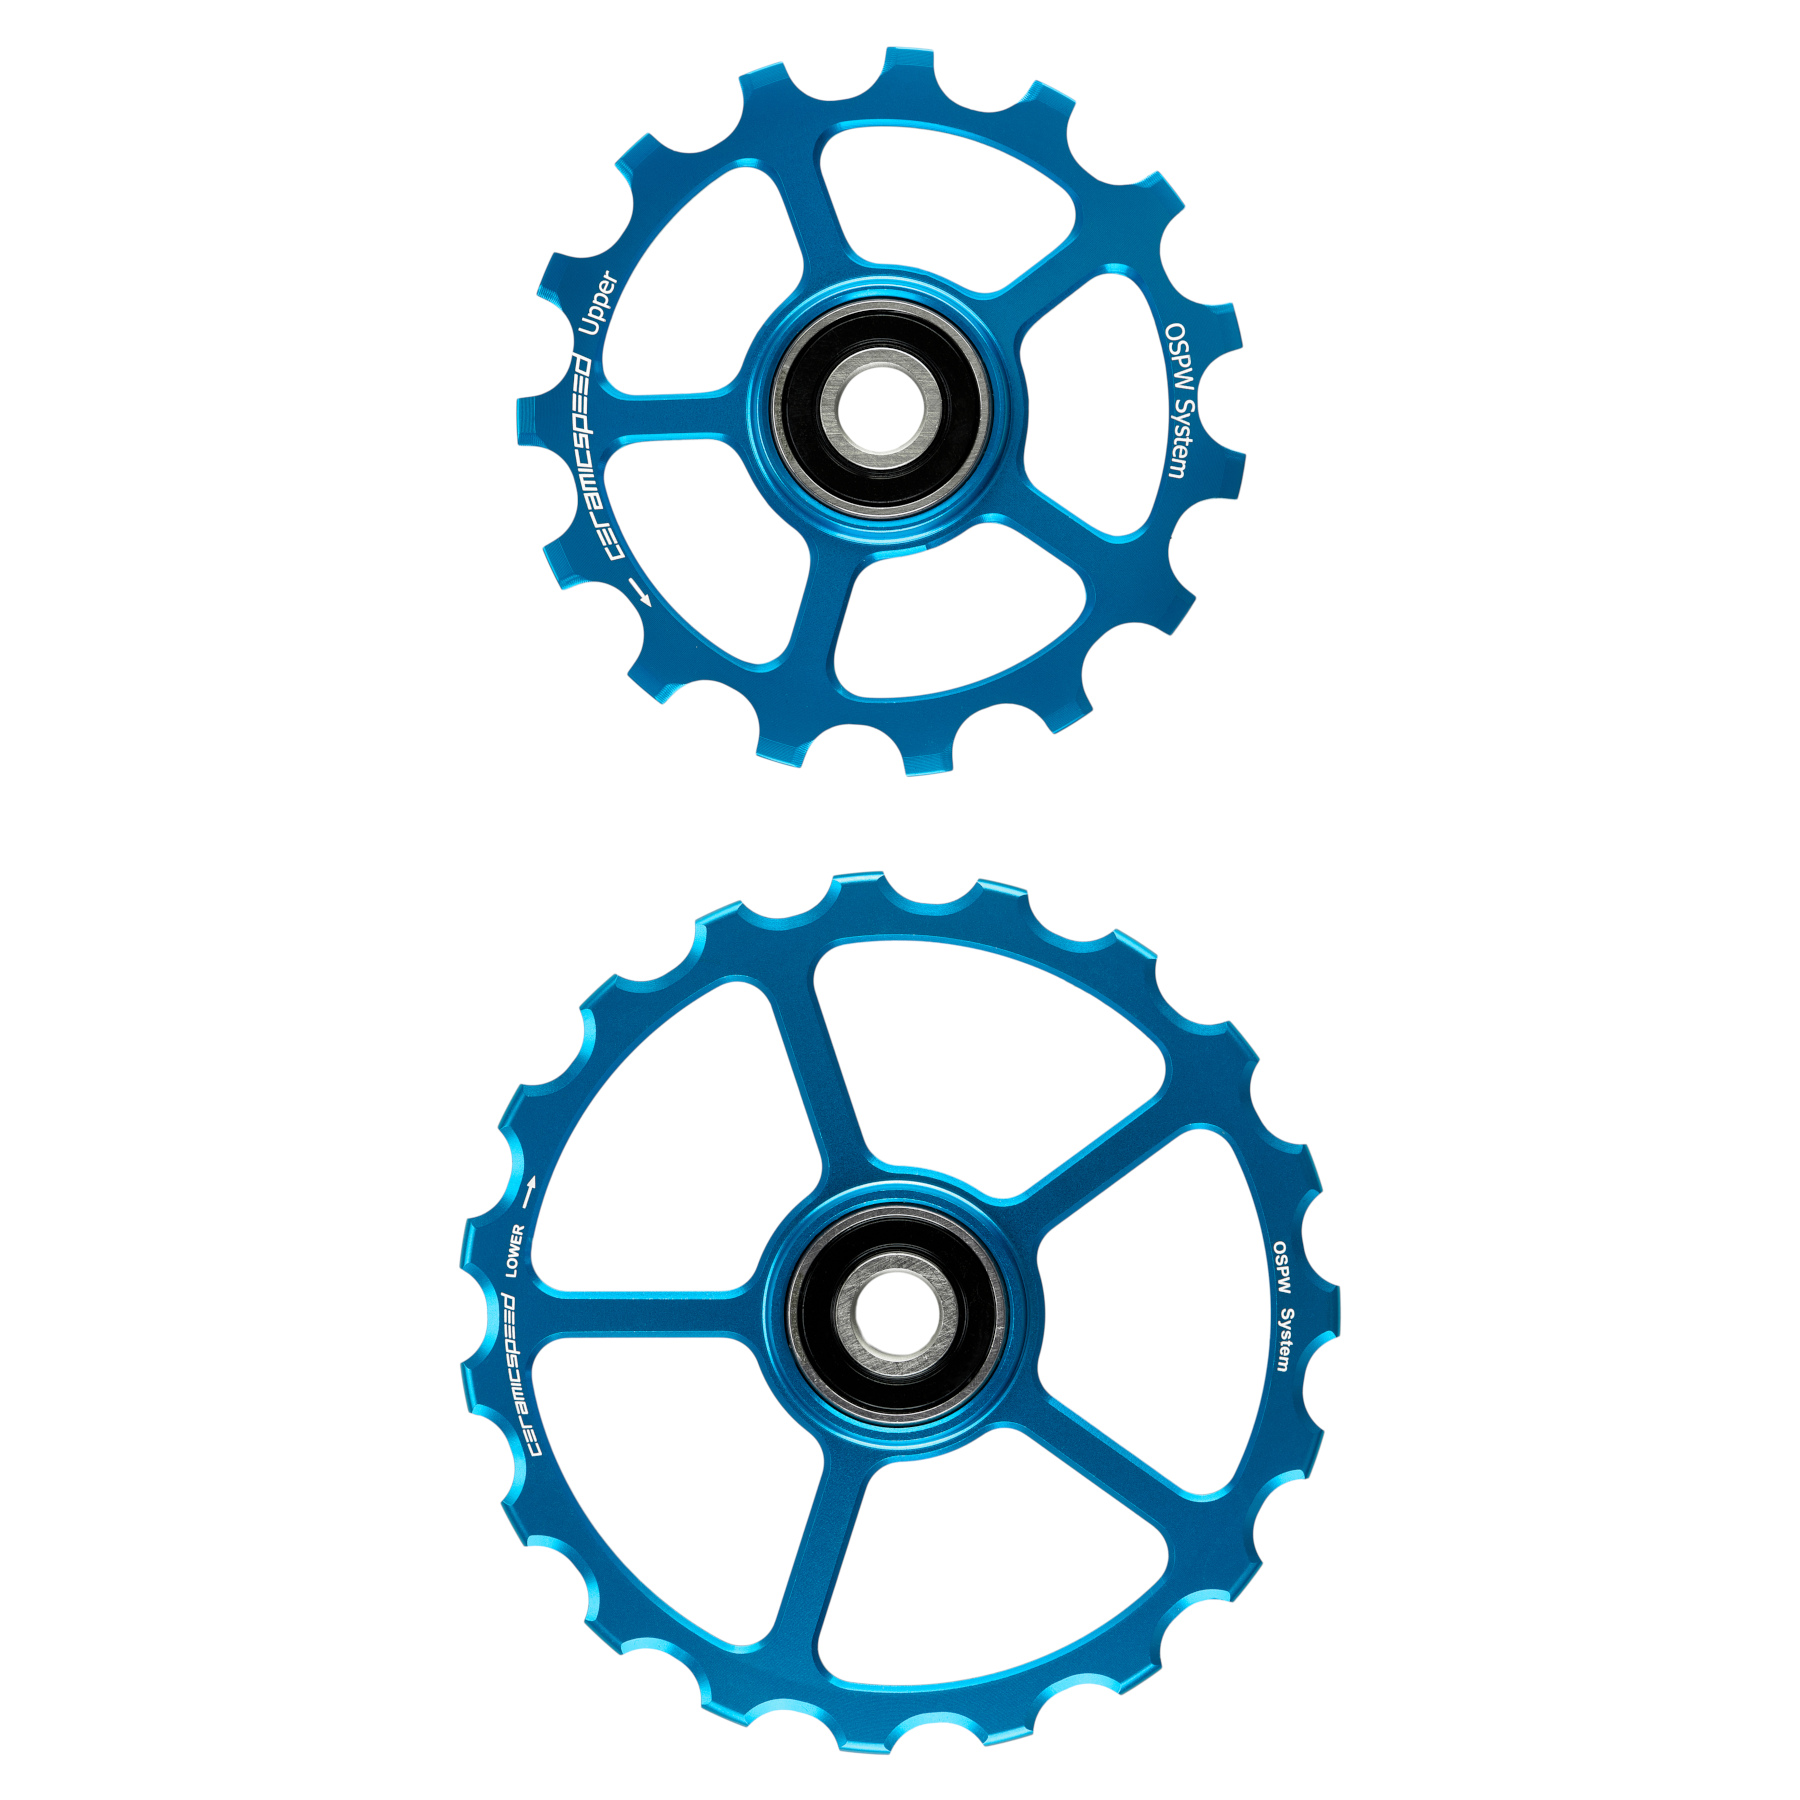 Image of CeramicSpeed Replacement Derailleur Pulleys - OSPW | 15/19 Teeth - blue